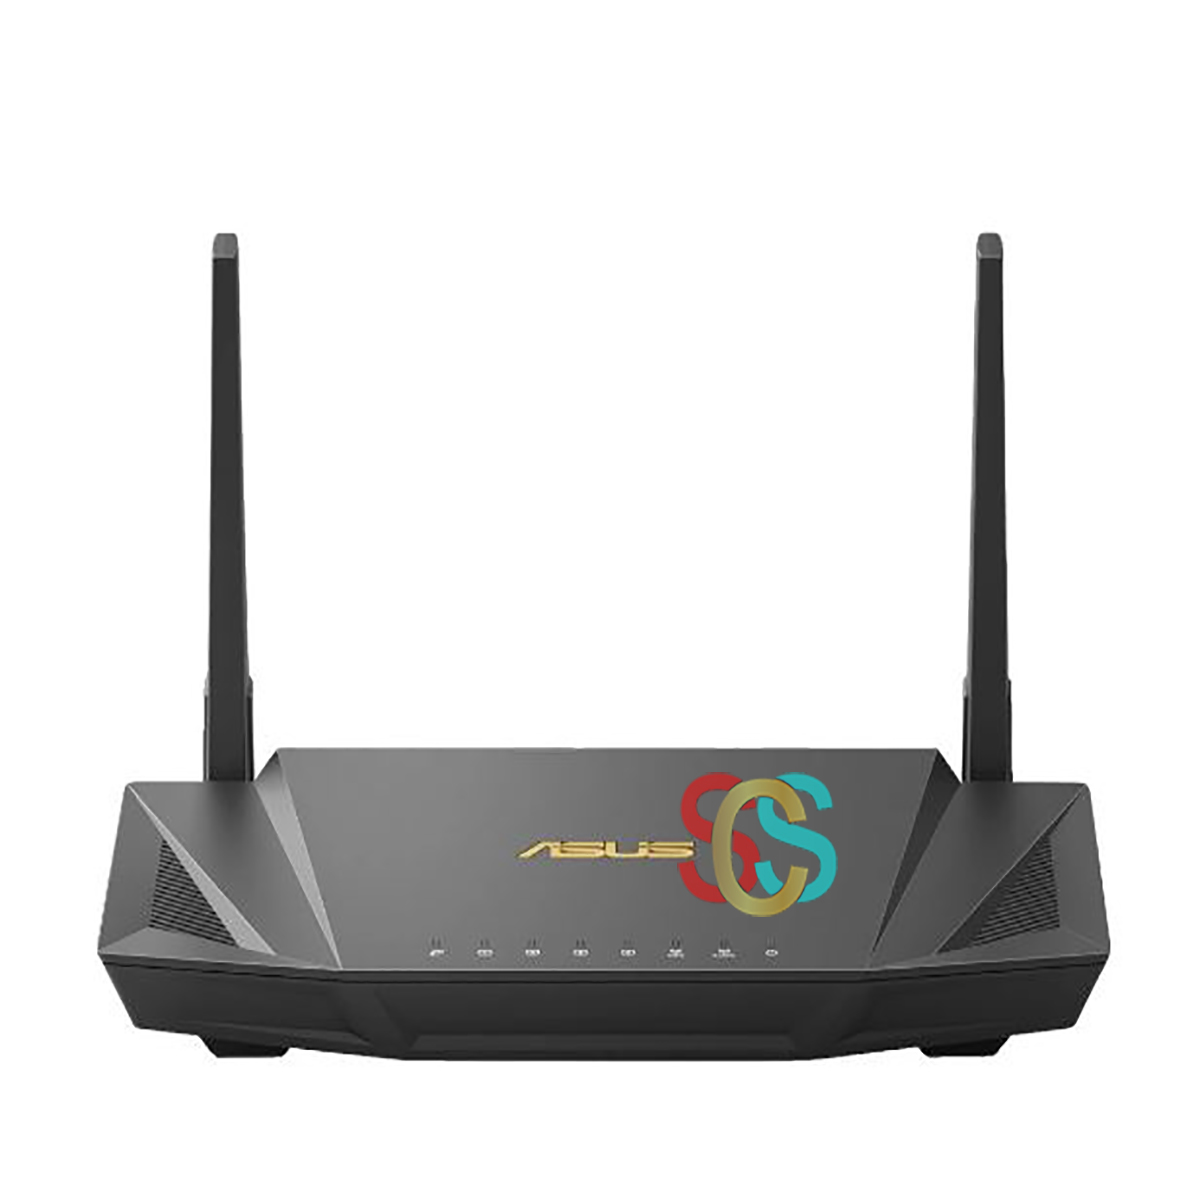 Asus RT-AX56U AX1800 Dual Band WiFi Router with MU-MIMO and OFDMA technology